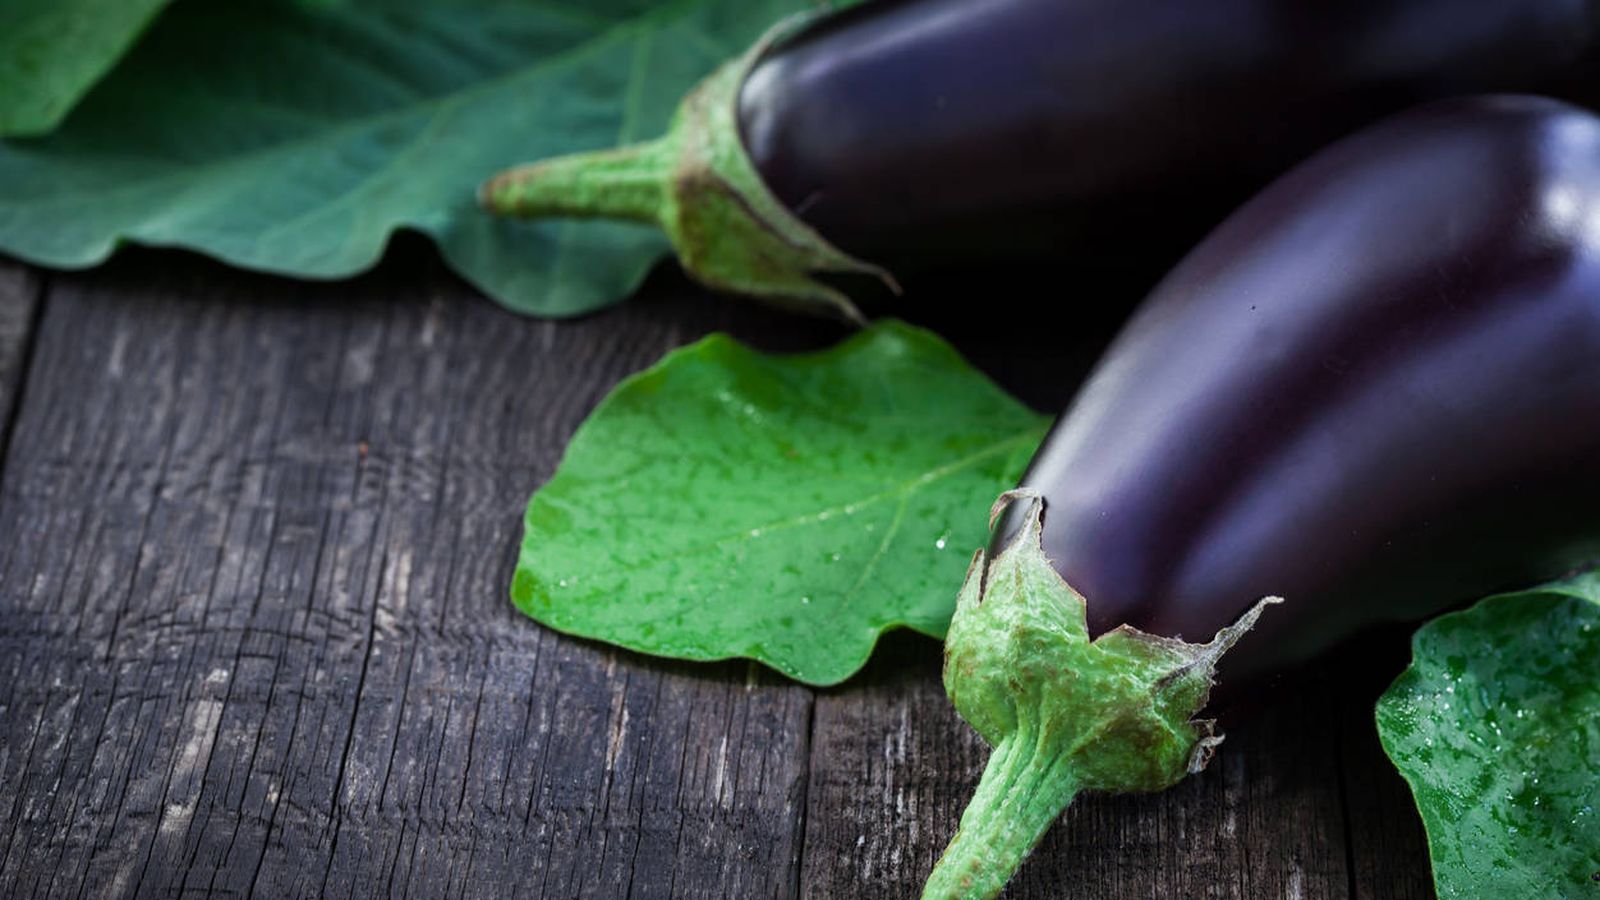 Photo: Eggplants, like meat, fish or eggs, are a food on the keto diet